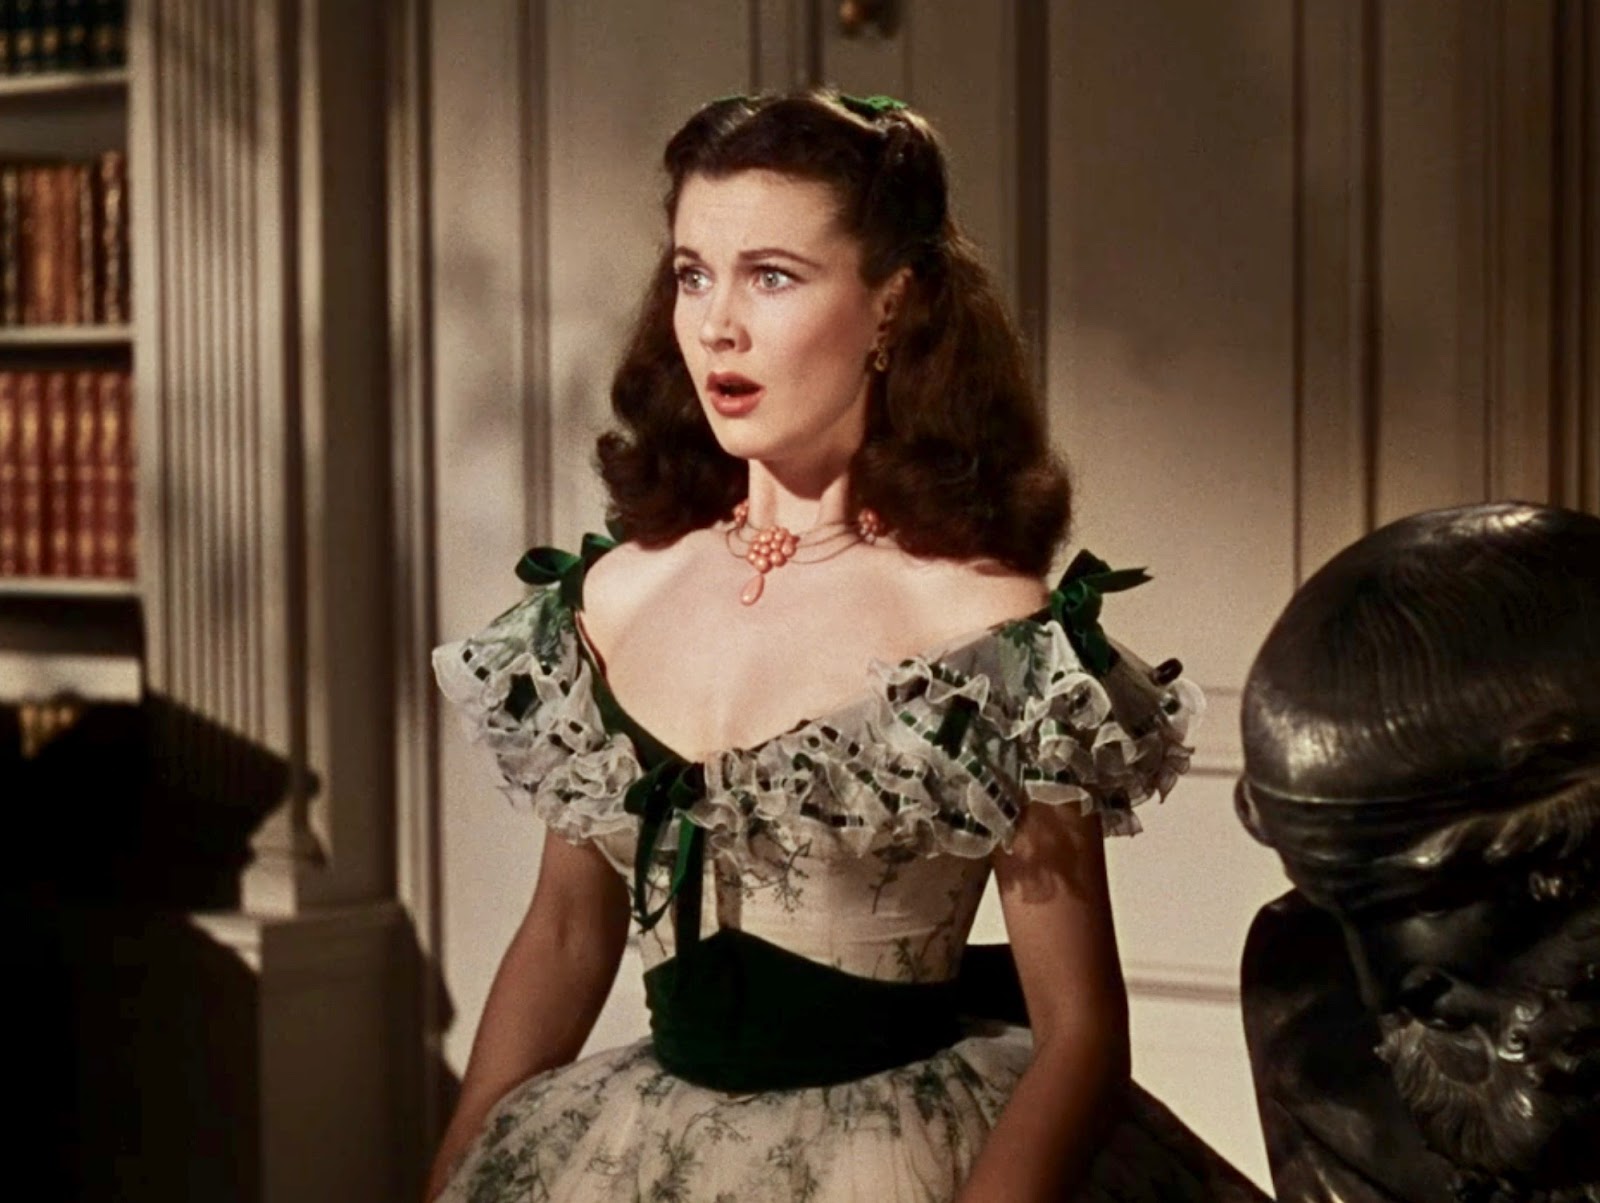 Vivian Leigh as Scarlett O'Hara in GONE WITH THE WIND.